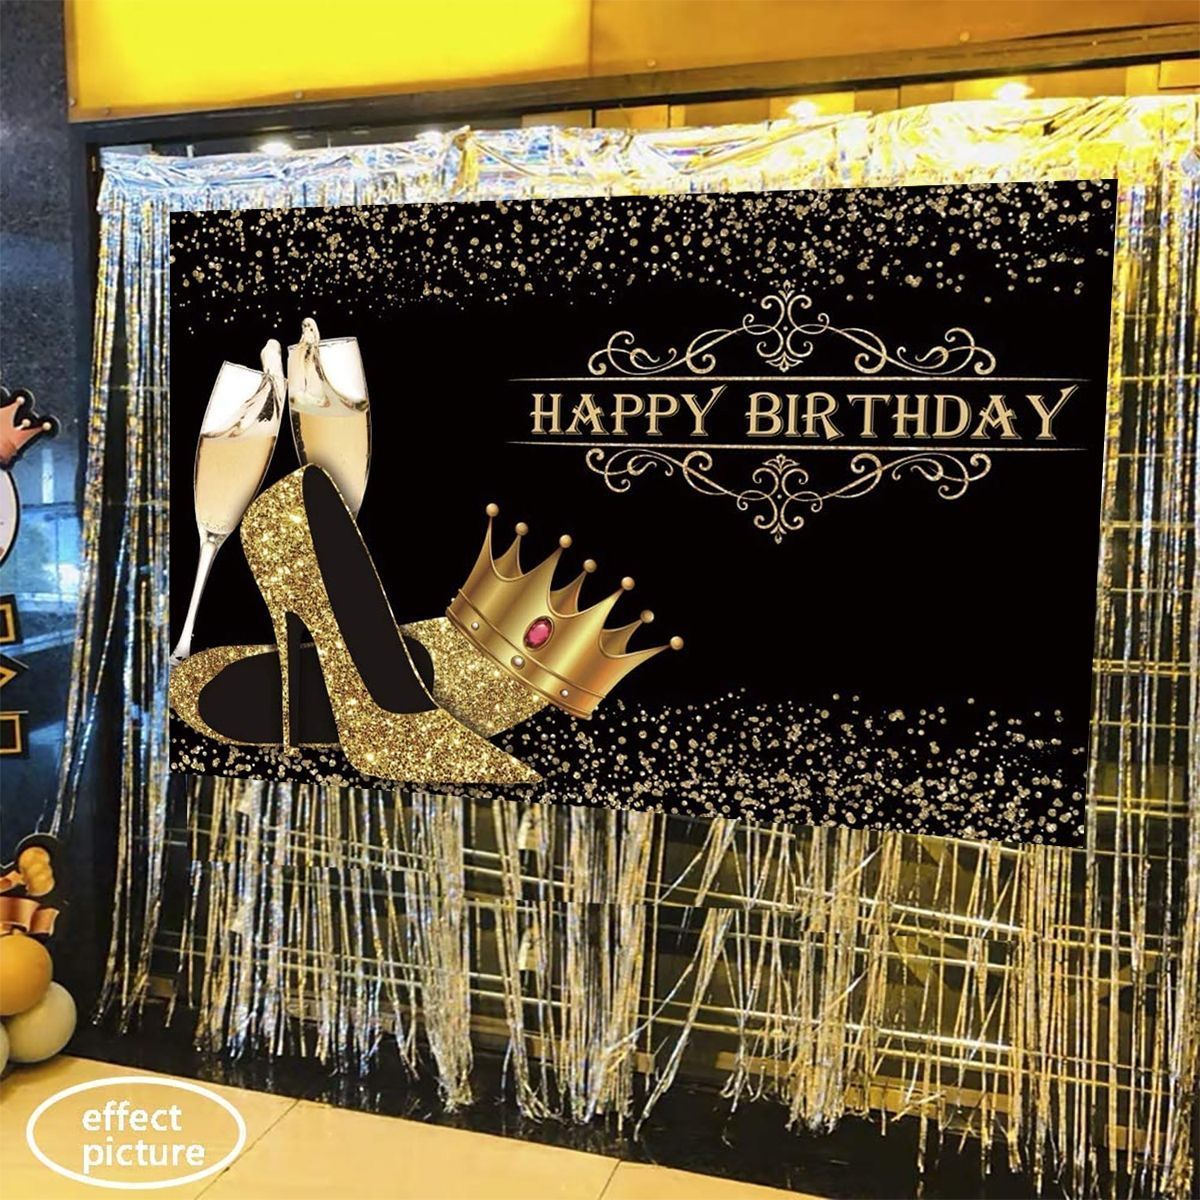 Happy-Birthday-Backdrop-Lady-Birthday-Prom-Party-Background-Shiny-Golden-Crown-High-Heel-Party-Banne-1759430